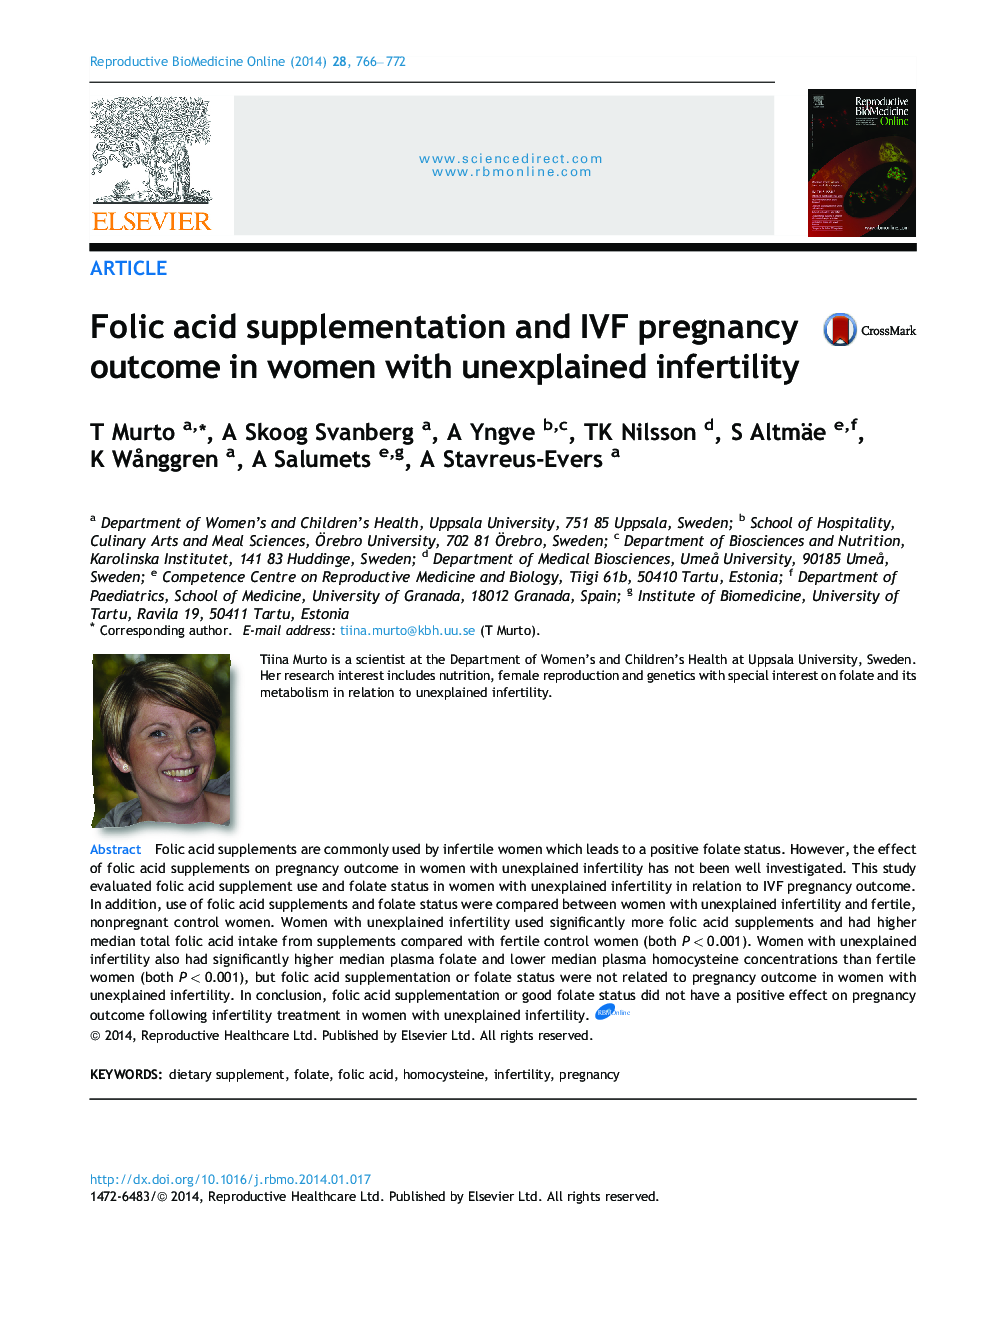 Folic acid supplementation and IVF pregnancy outcome in women with unexplained infertility 